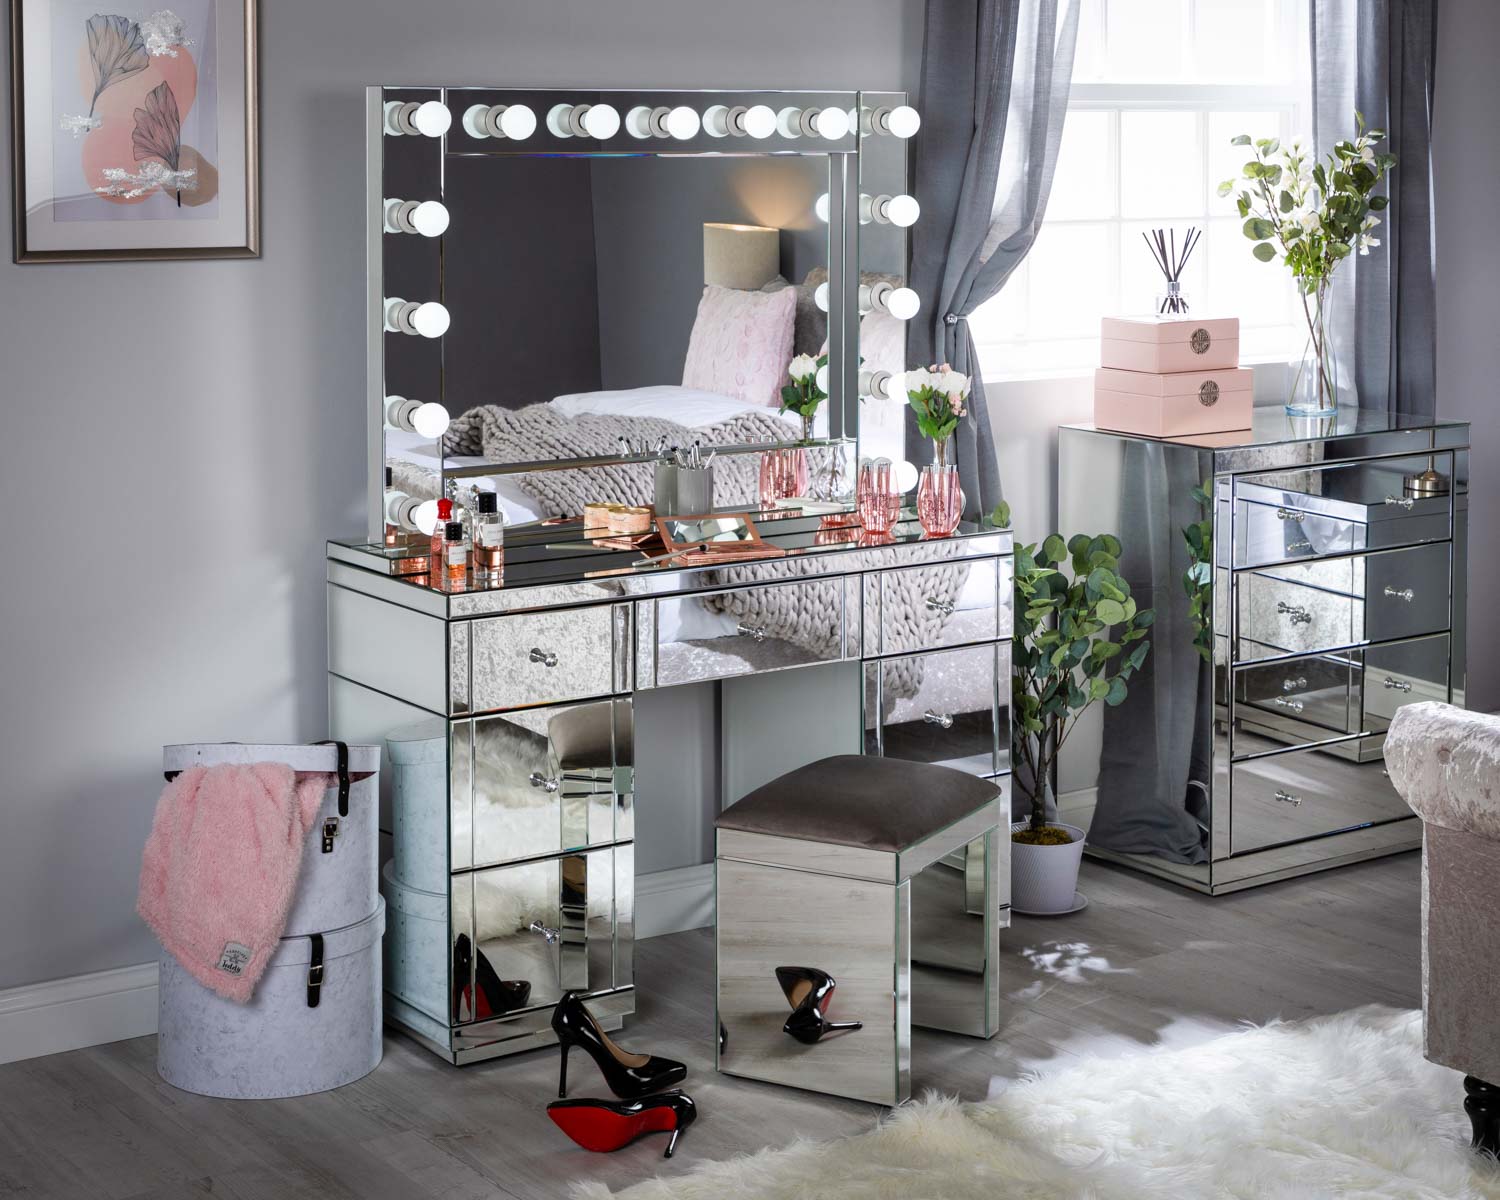 Silver Mirrored Dressing Table Set with Stool and Large Hollywood Mirror - Monroe